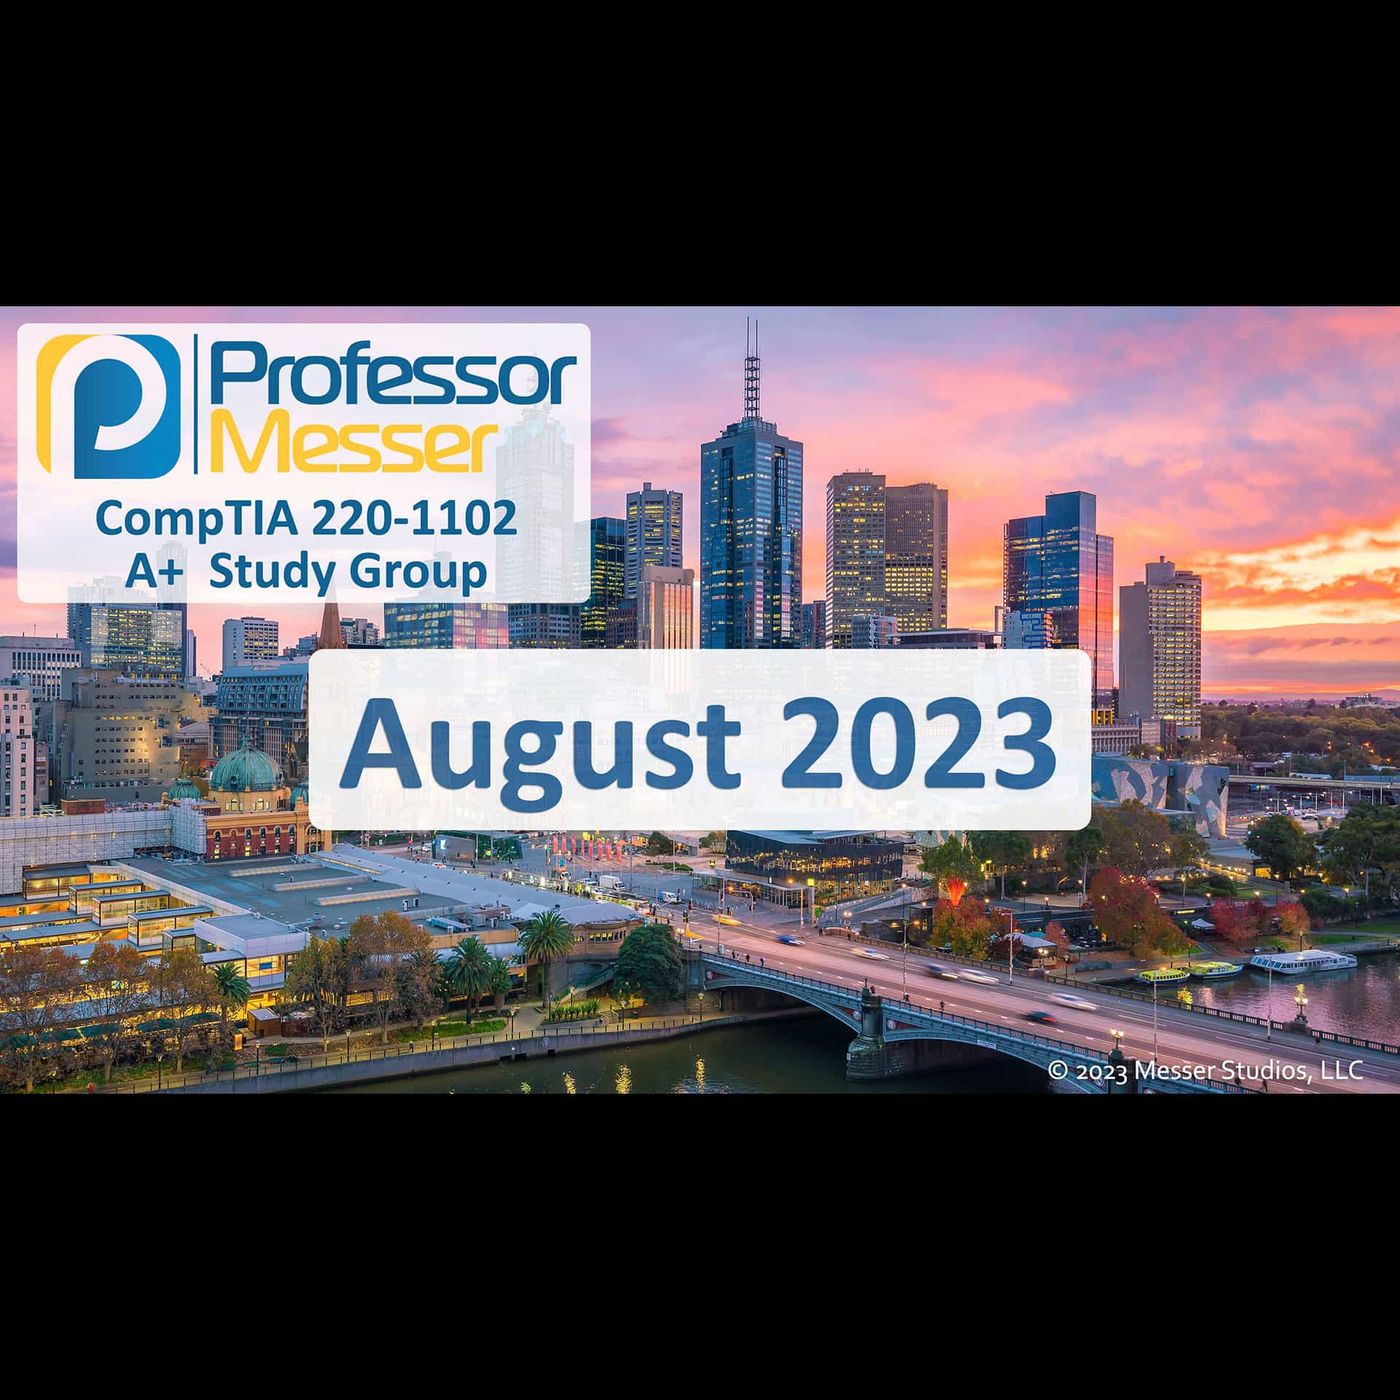 Professor Messer's CompTIA 220-1102 A+ Study Group - August 2023